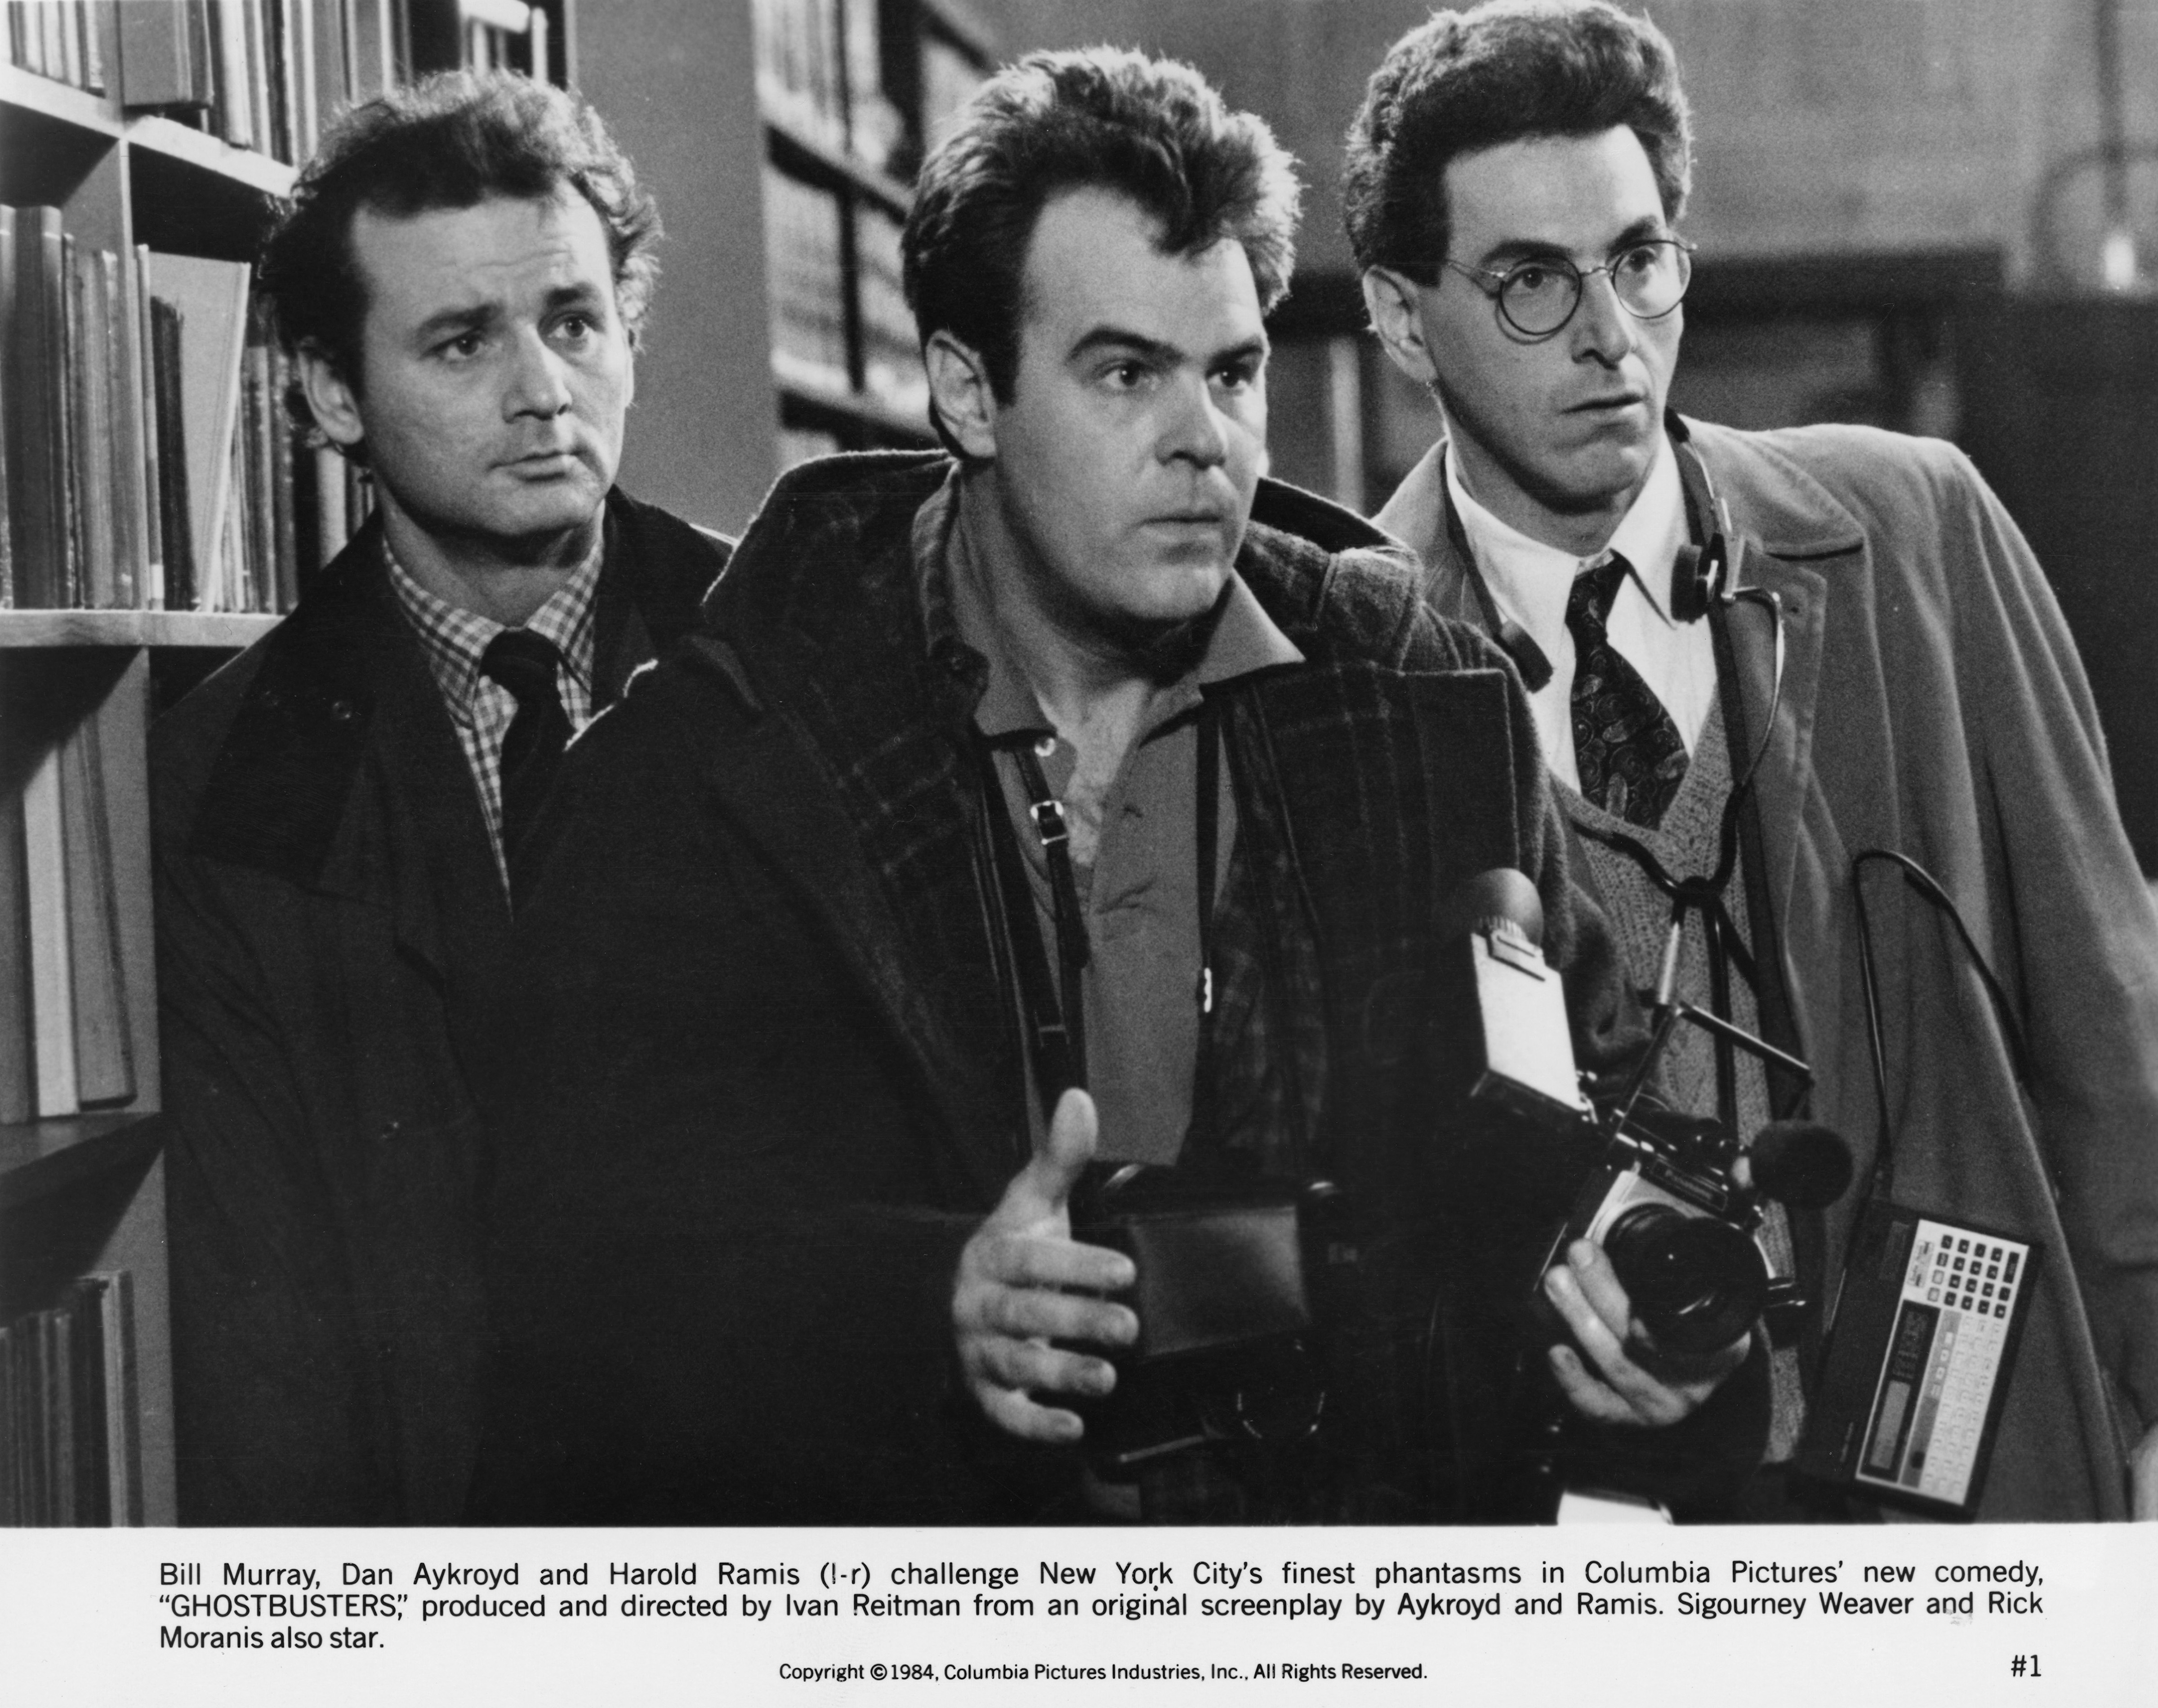 Bill Murray, Dan Aykroyd and Harold Ramiss on the set of "Ghostbusters," 1984 | Source: Getty Images